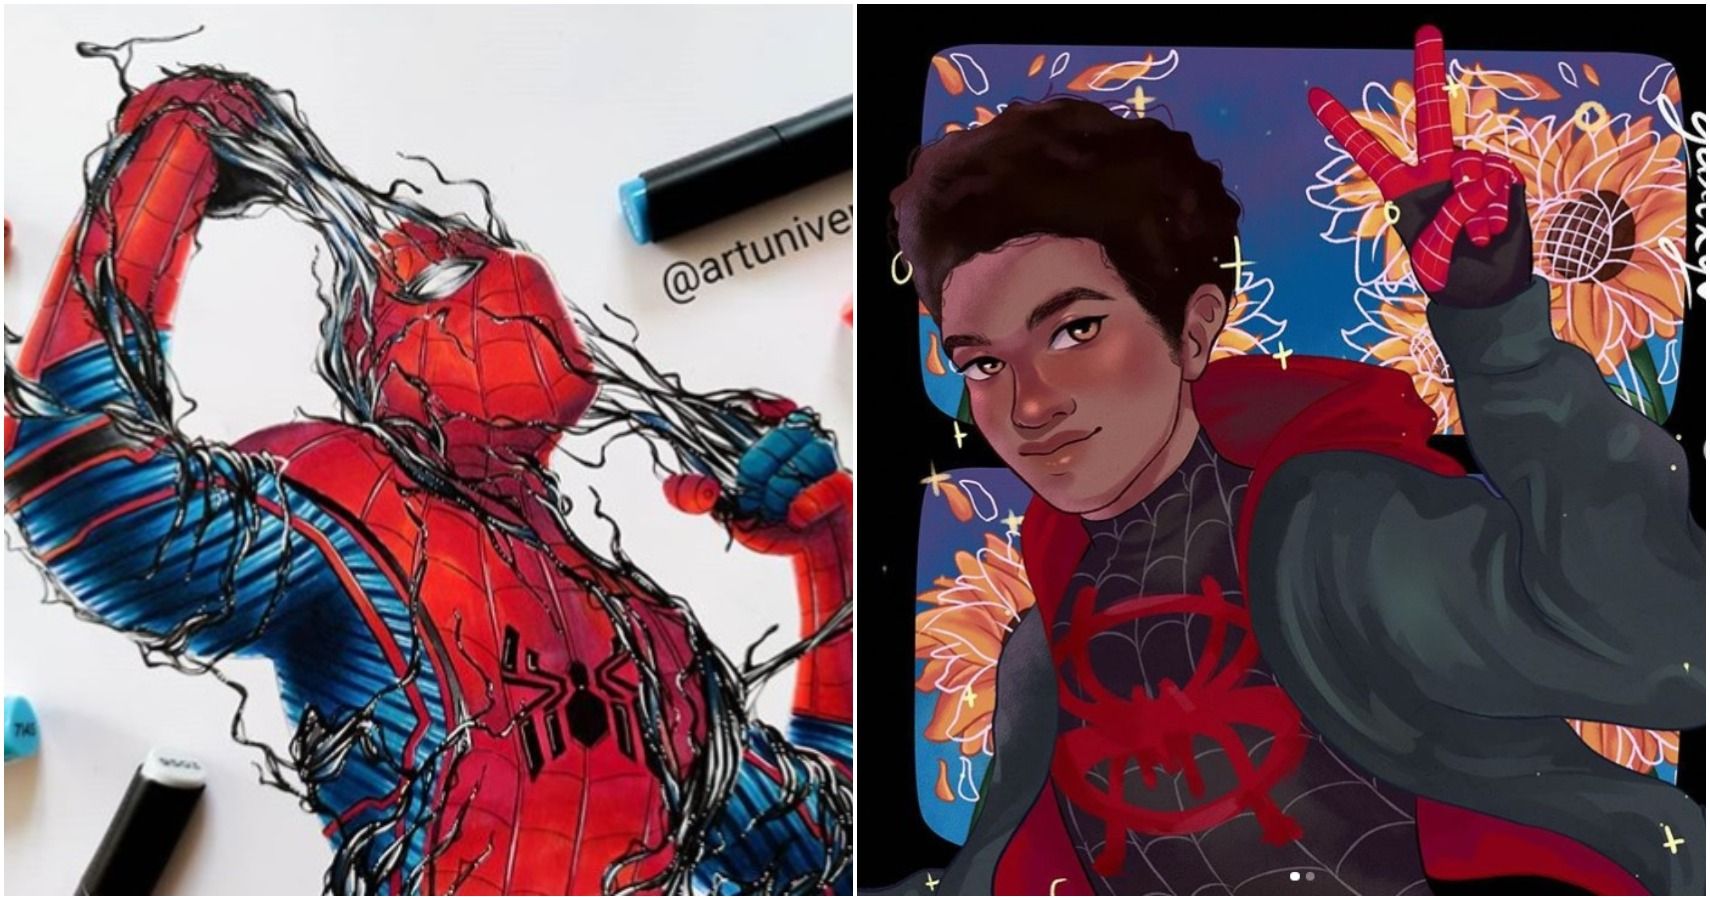 10 Awesome Pieces Of Spider-Man Fan Art We Love